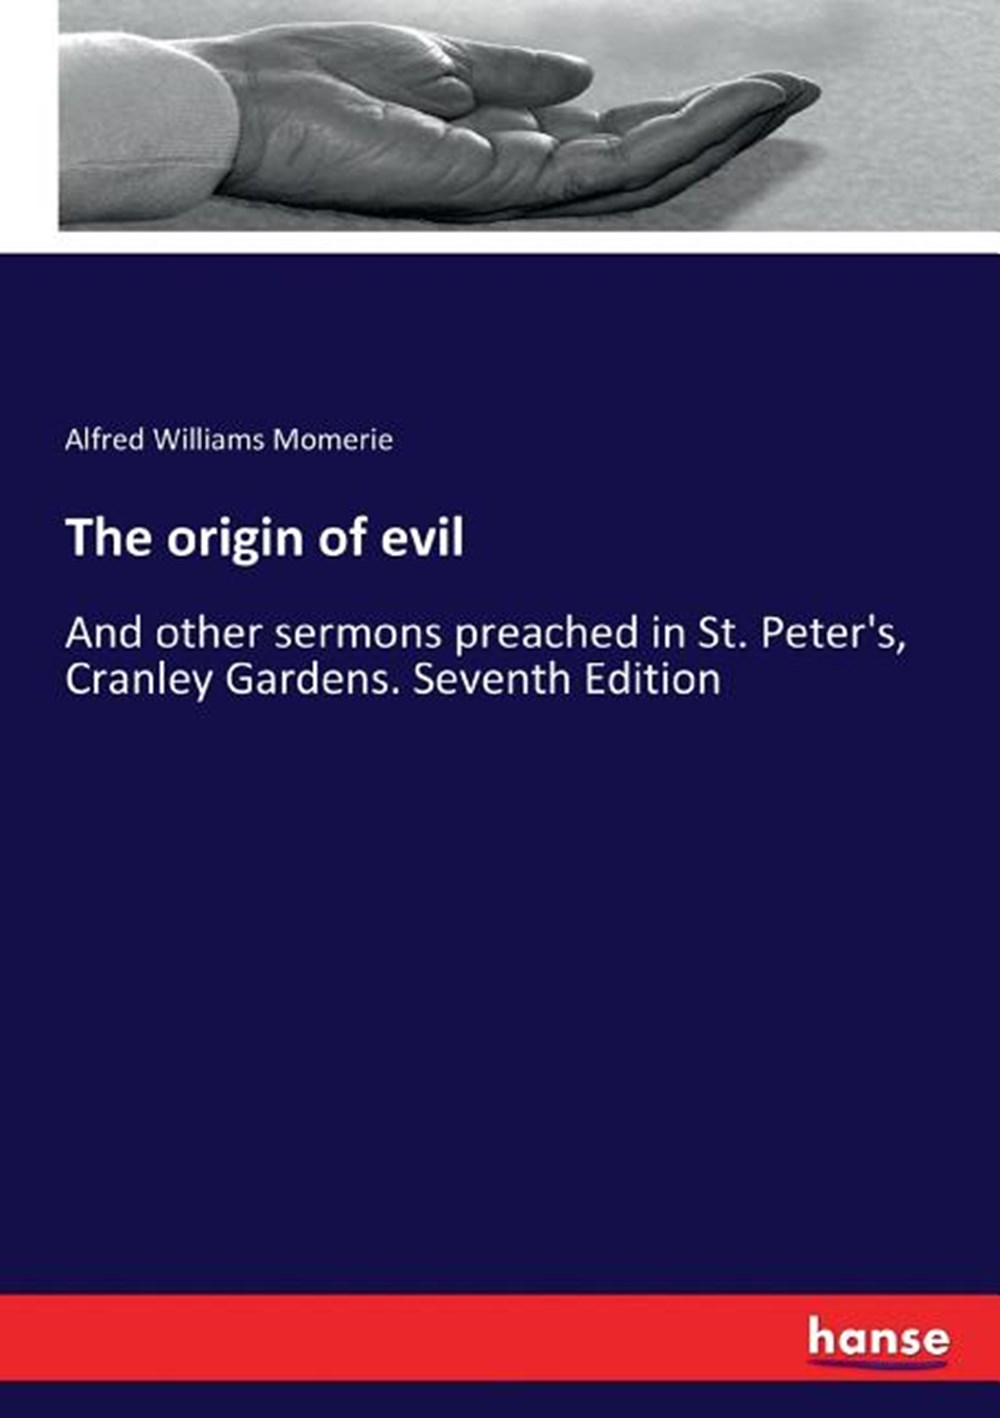 origin of evil: And other sermons preached in St. Peter's, Cranley Gardens. Seventh Edition